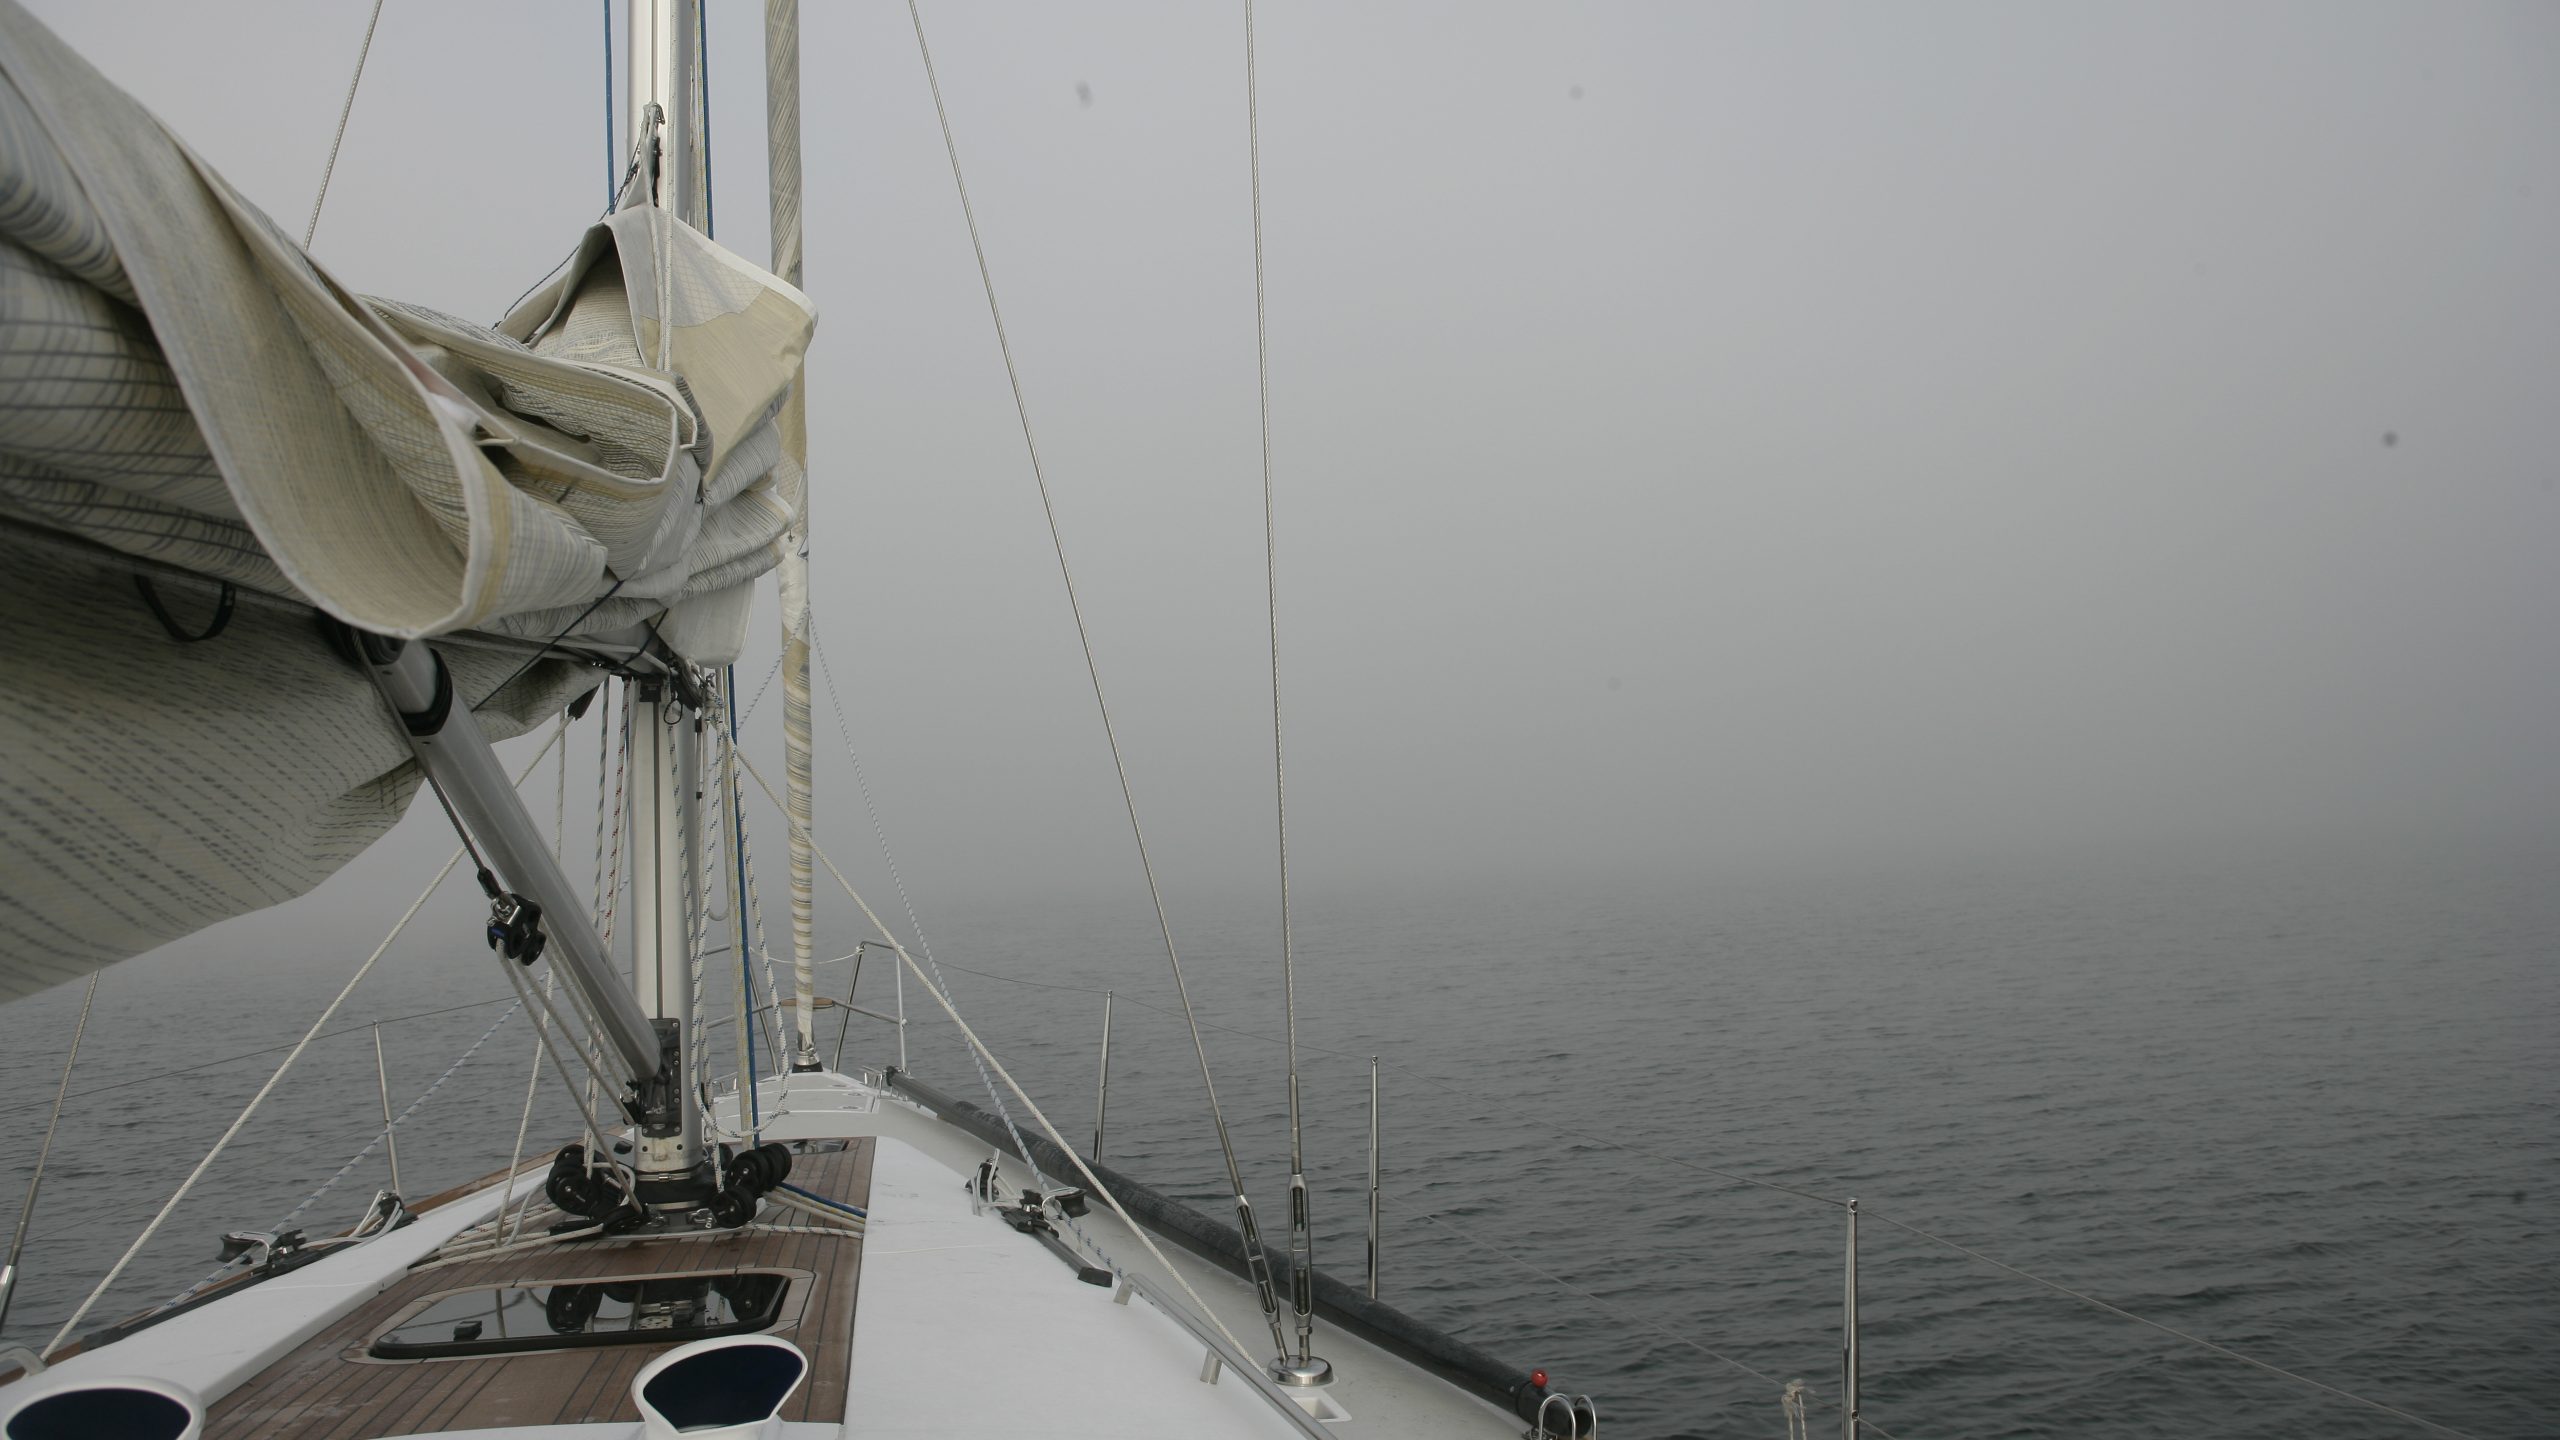 A boat sailing towards a tidal headland in poor visibility with no working engine or electrics